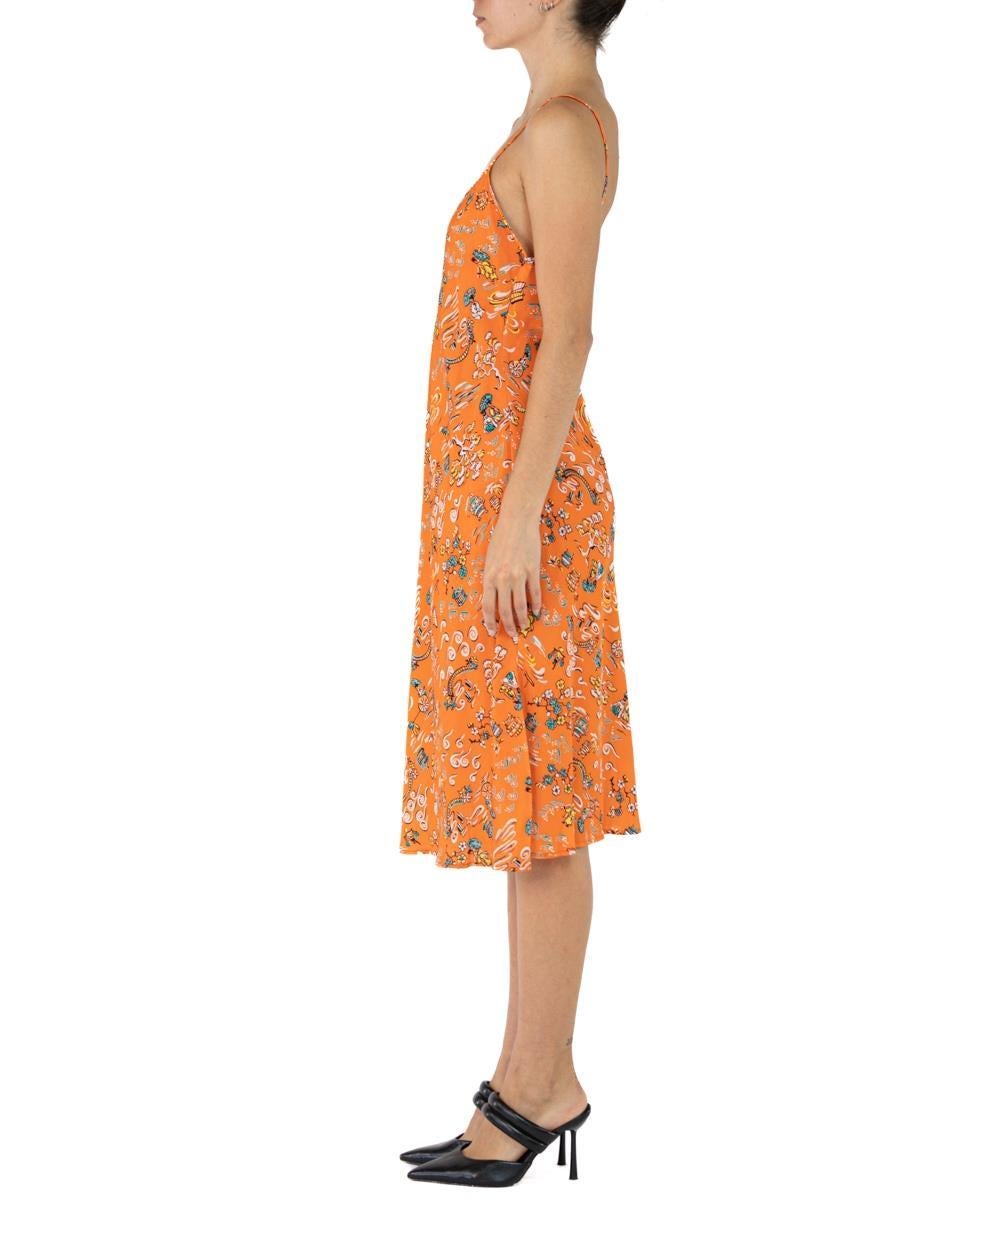 Morphew Collection Orange & Green Cherry Blossom Novelty Print Cold Rayon Bias  Slip Dress Master Medium
MORPHEW COLLECTION is made entirely by hand in our NYC Ateliér of rare antique materials sourced from around the globe. Our sustainable vintage